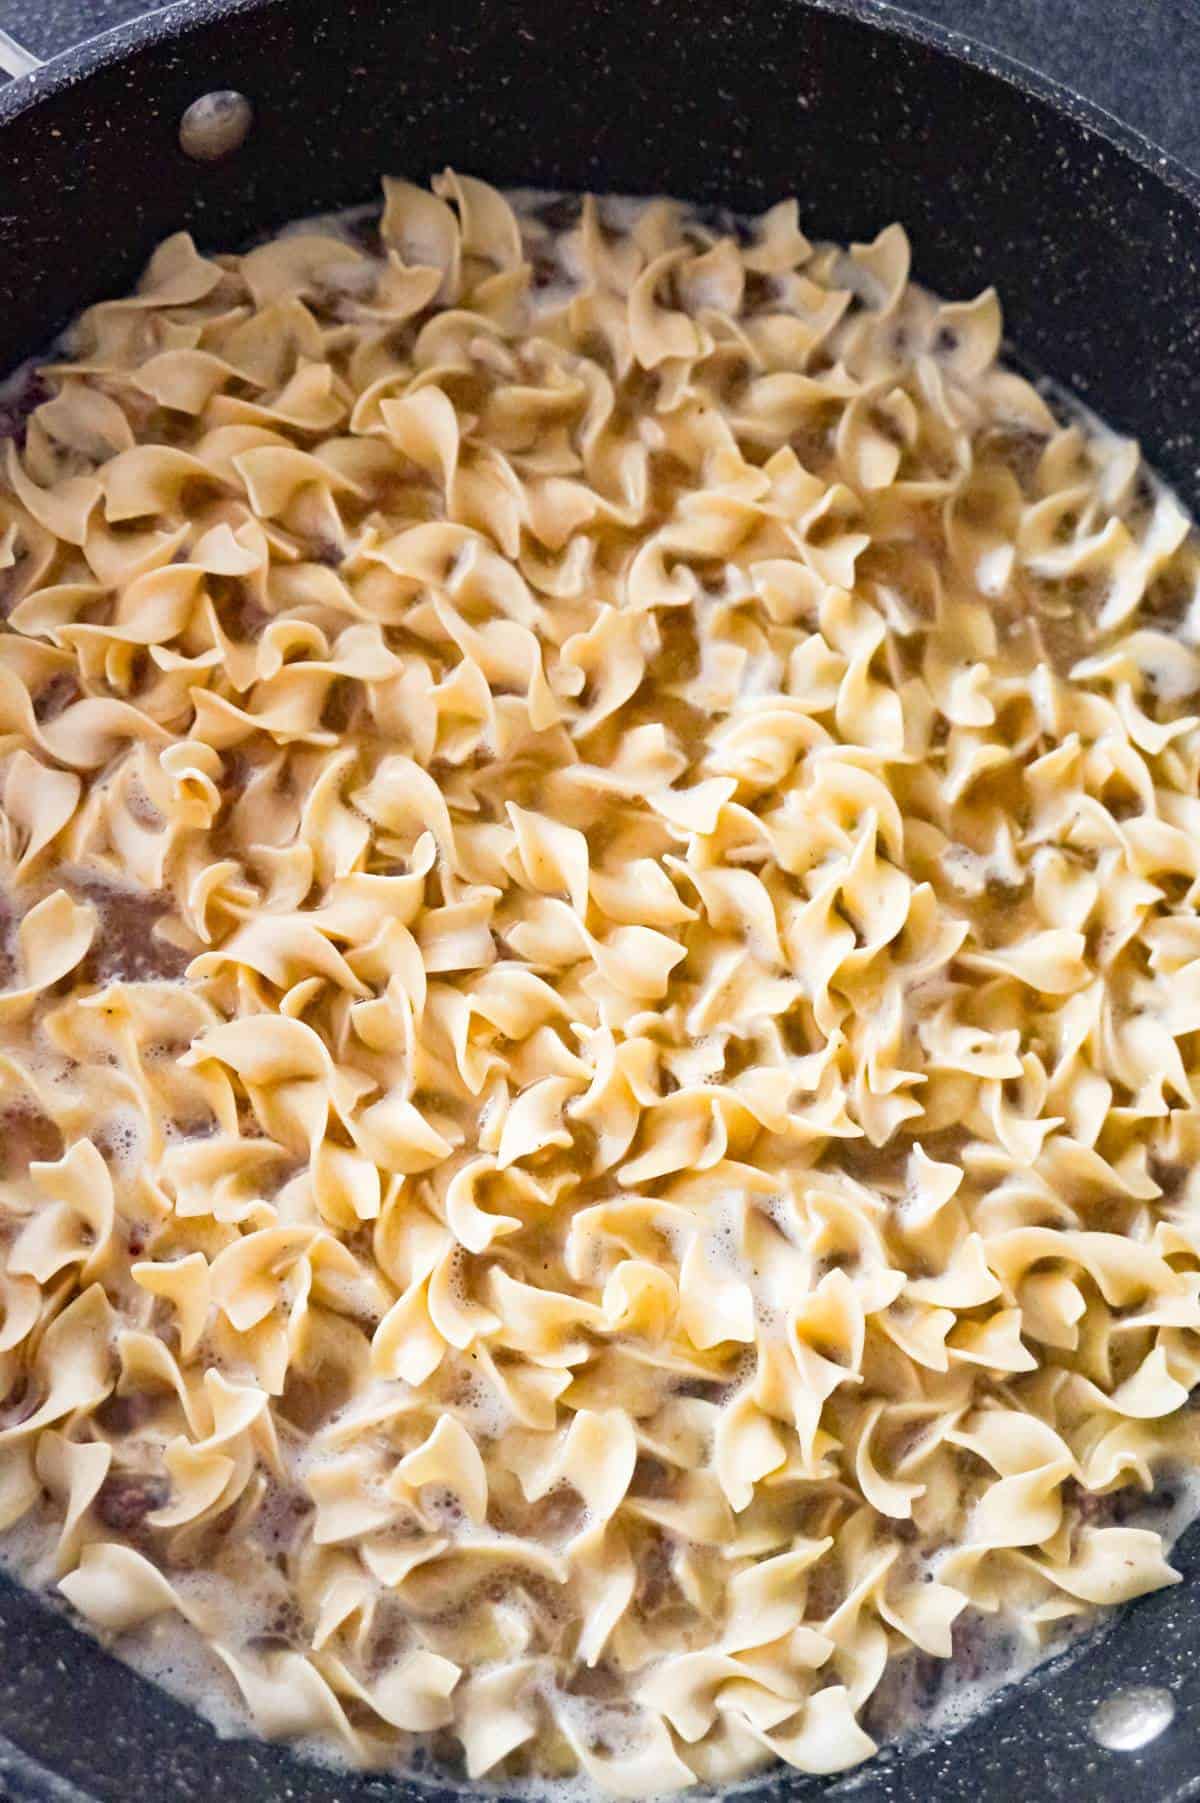 uncooked egg noodles in a pan with cooked ground beef